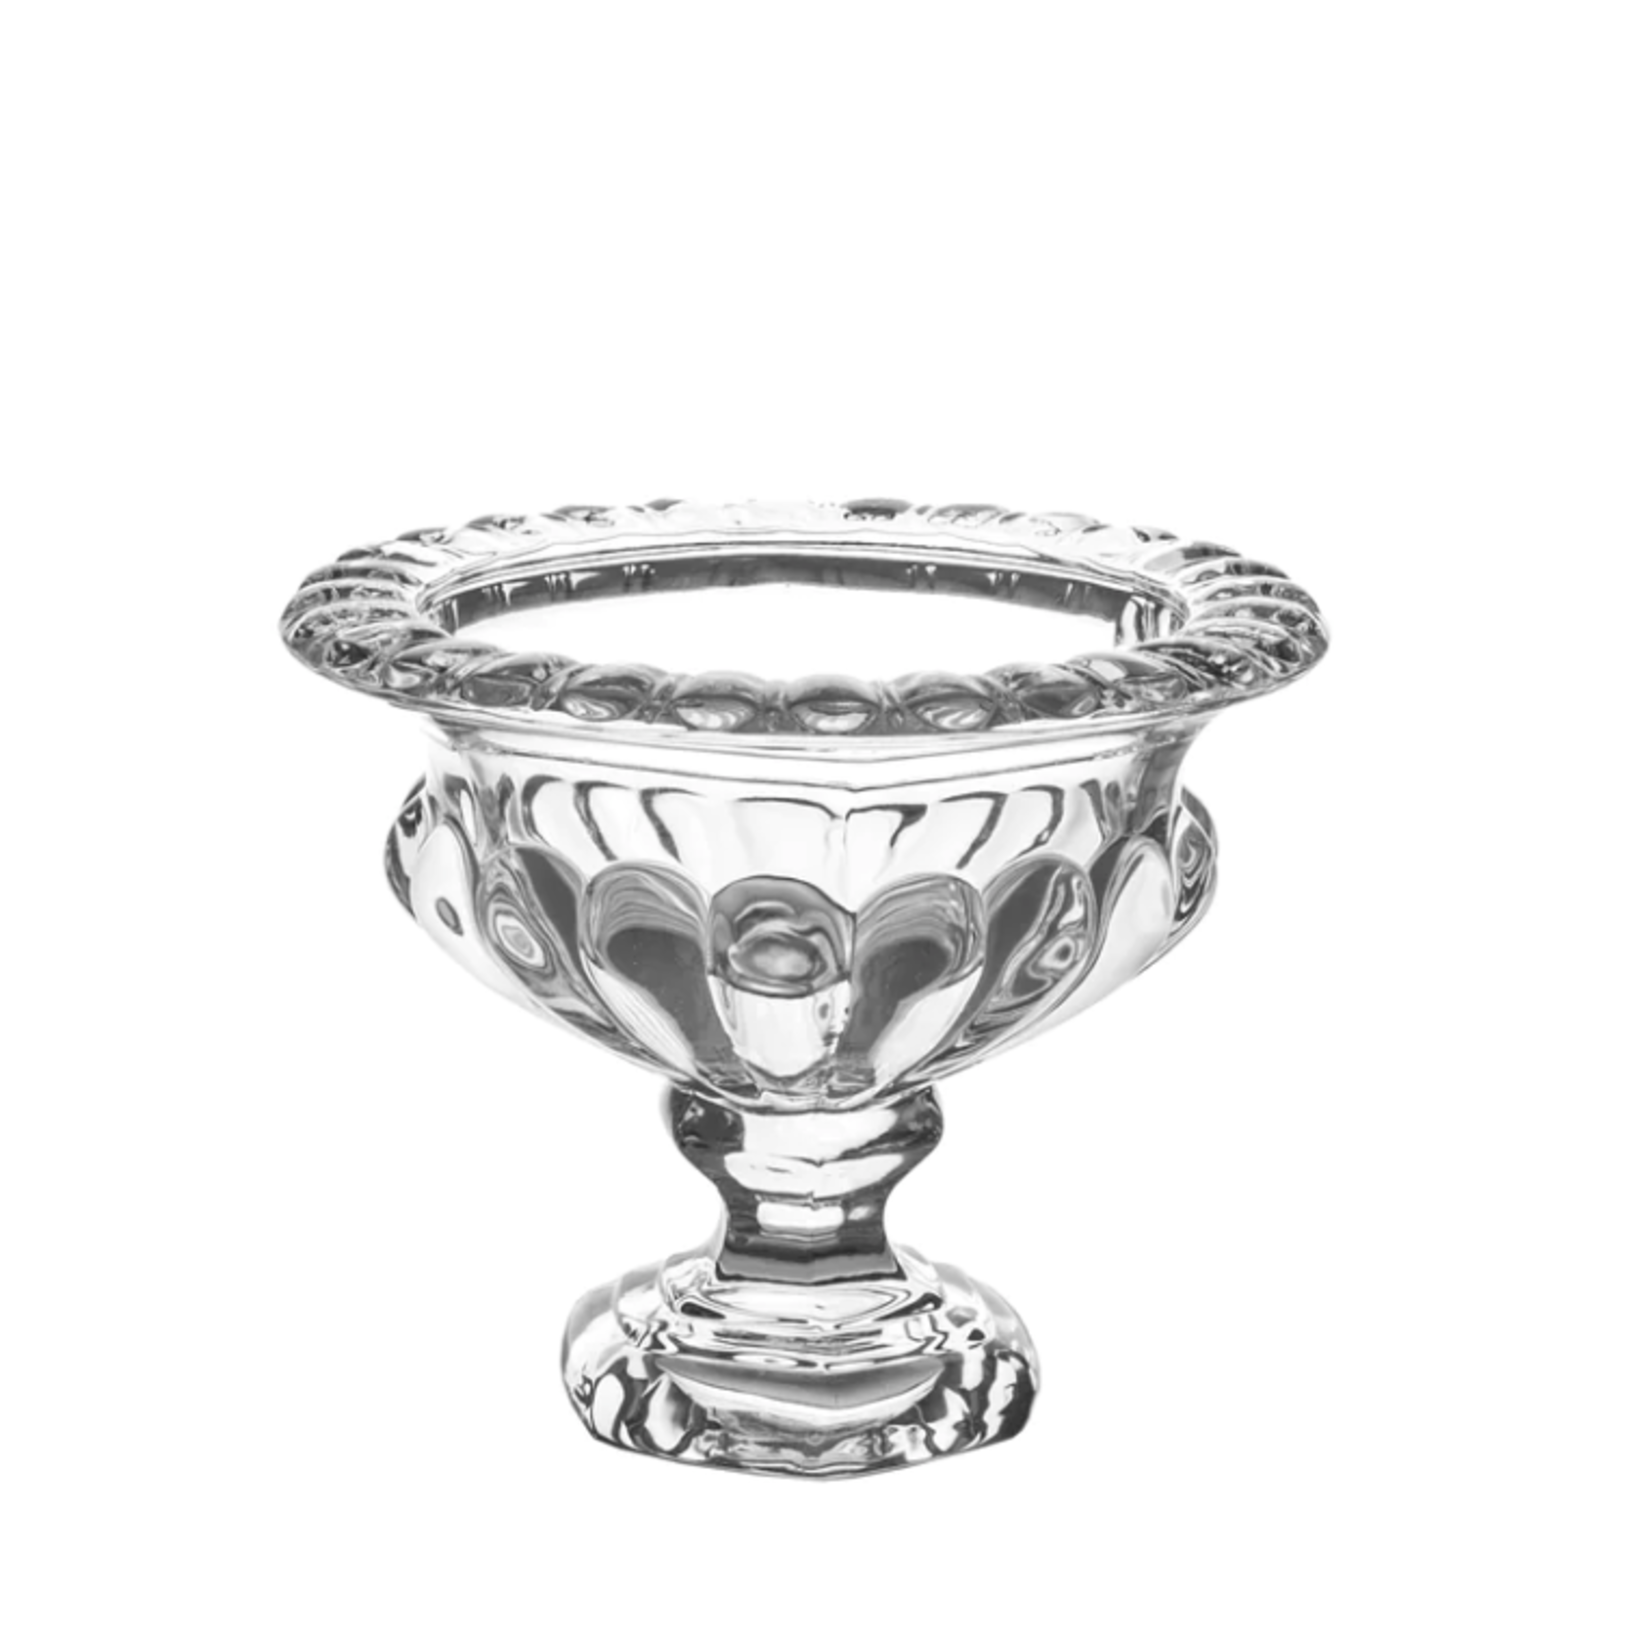 6.5”H X 8” THICK GLASS COMPOTE